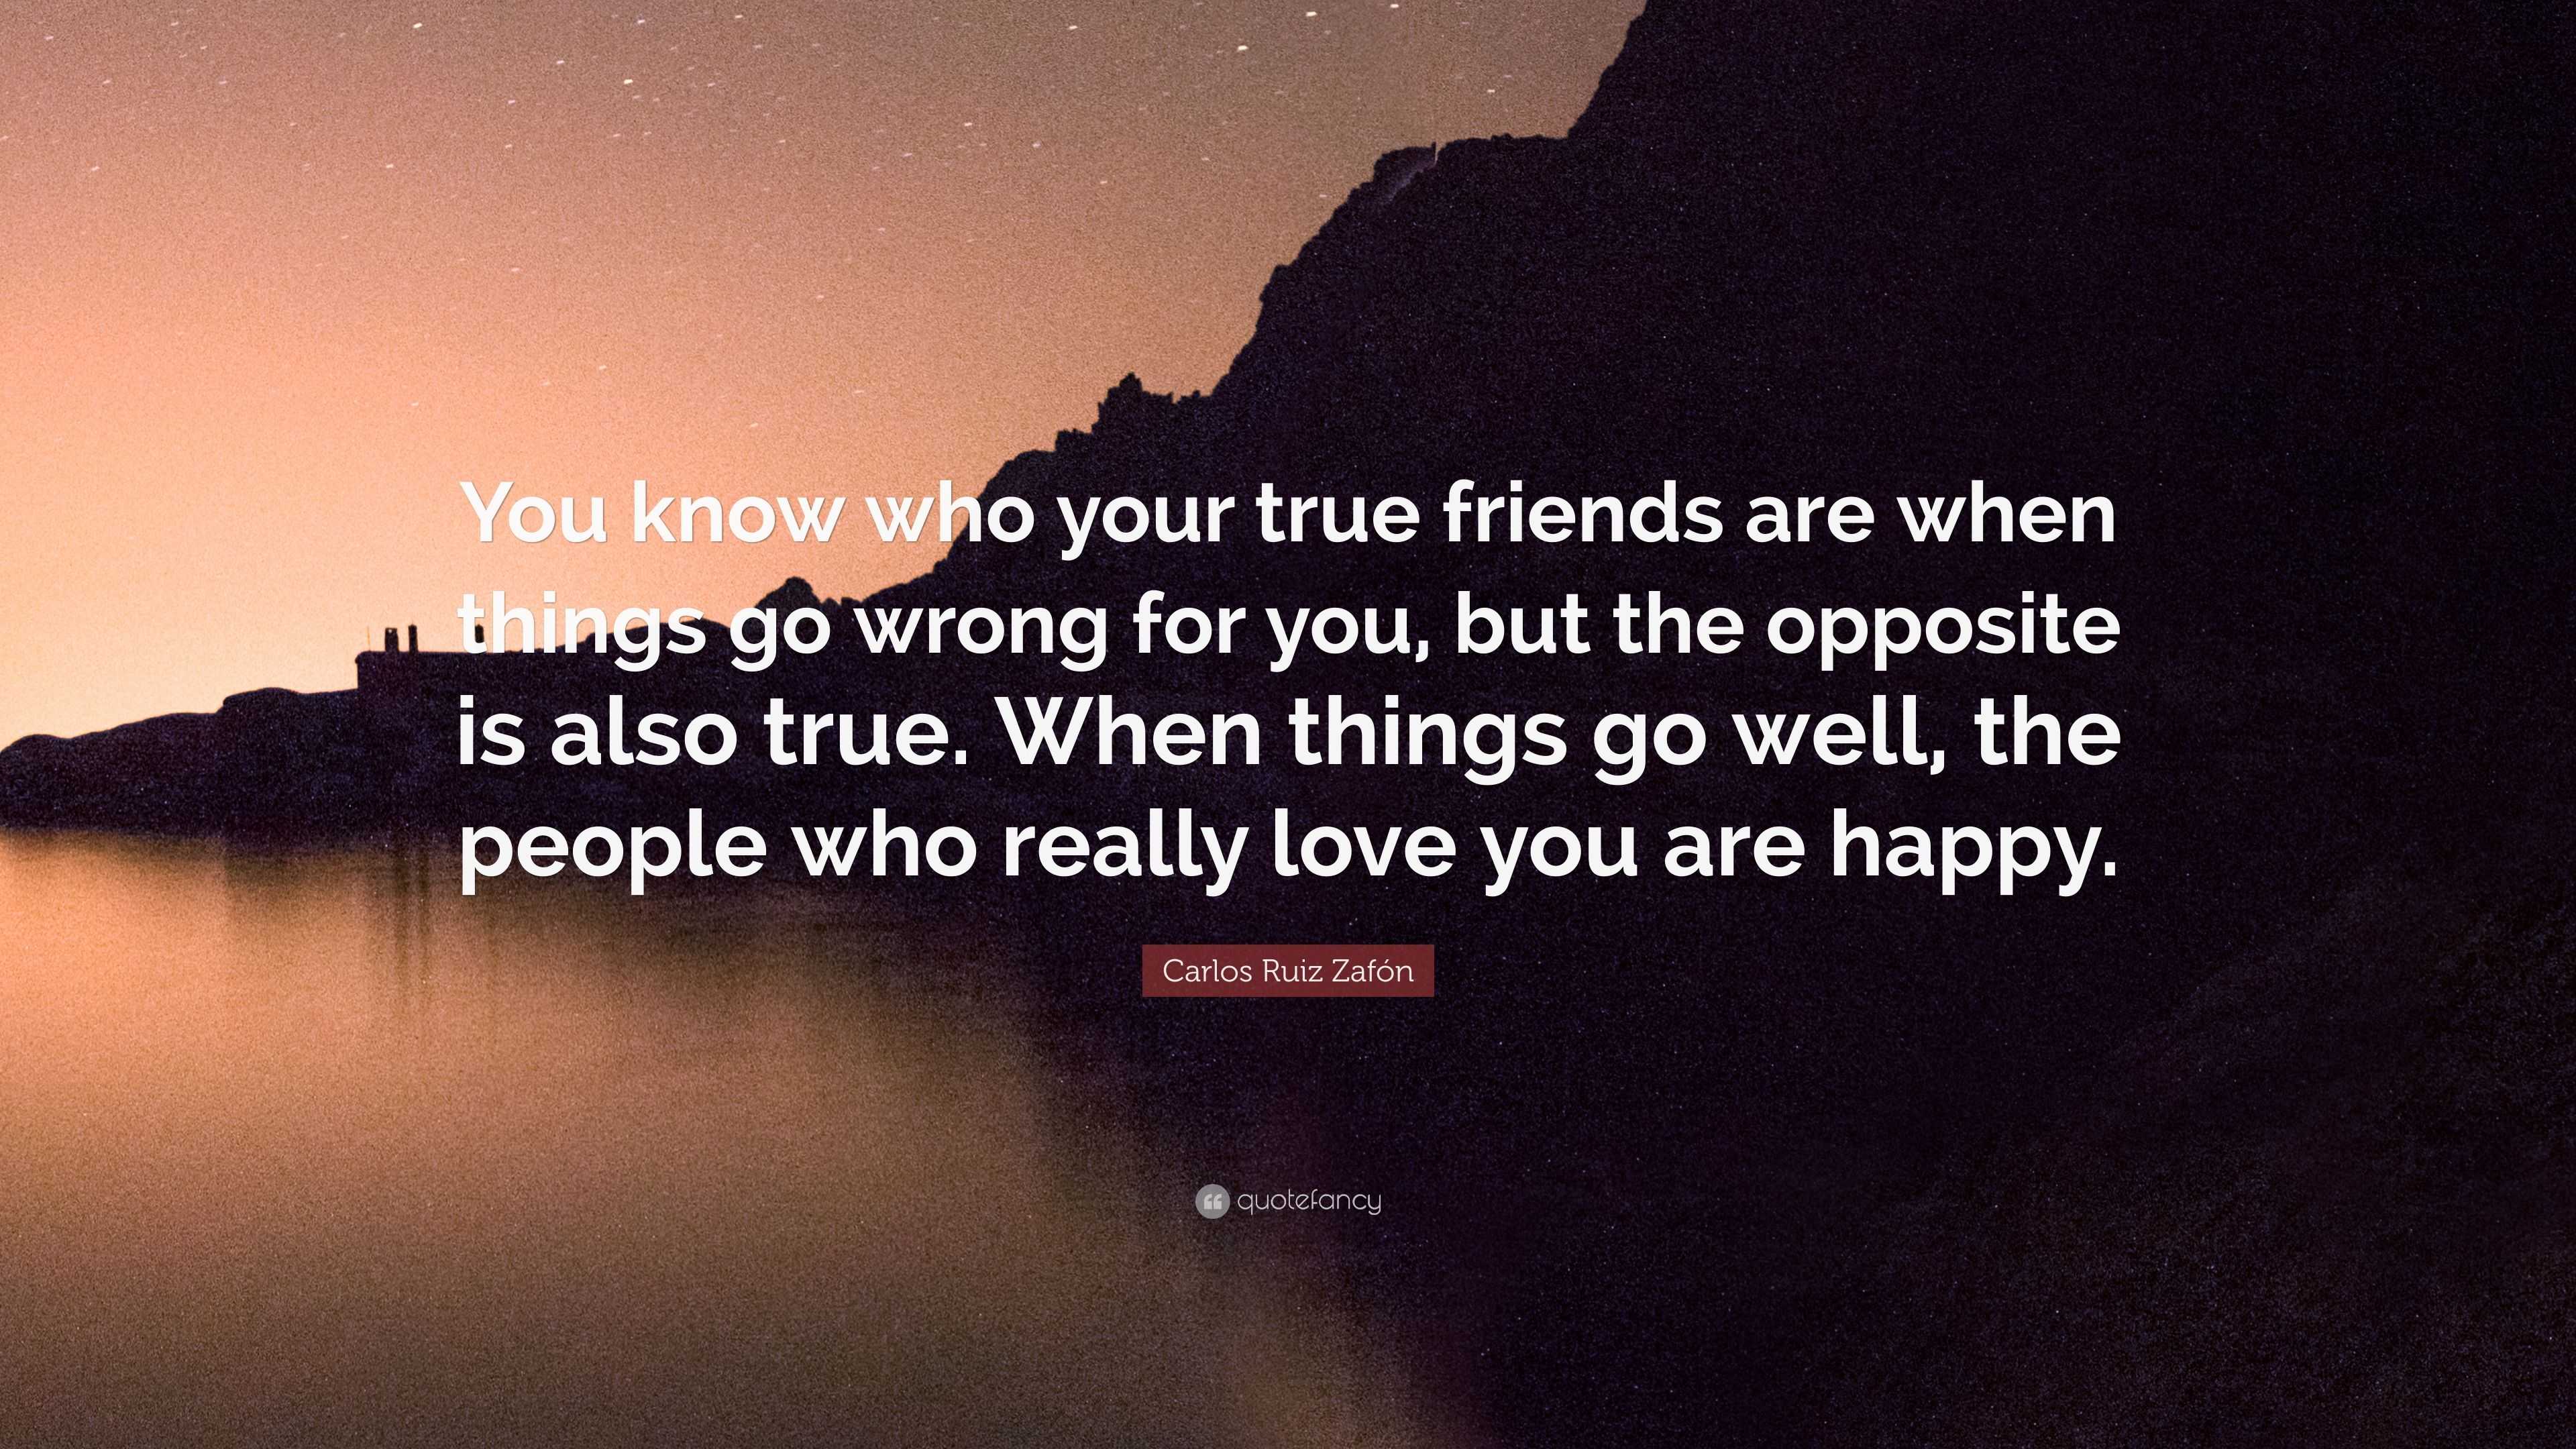 Carlos Ruiz Zafón Quote “you Know Who Your True Friends Are When